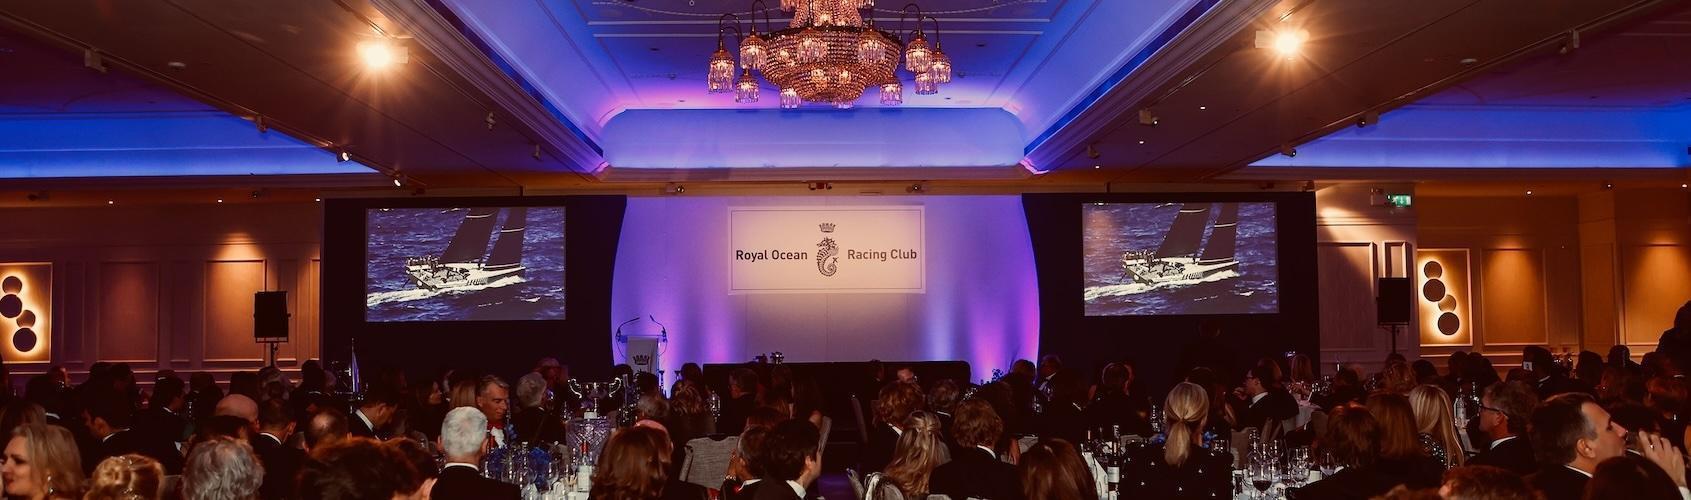 The RORC 2024 Annual Dinner & Prize Giving will take place at The Church House, Dean's Yard, London.
Join us at this year's black tie awards ceremony for the RORC Season's Points Championship and special awards including Yacht of the Year.